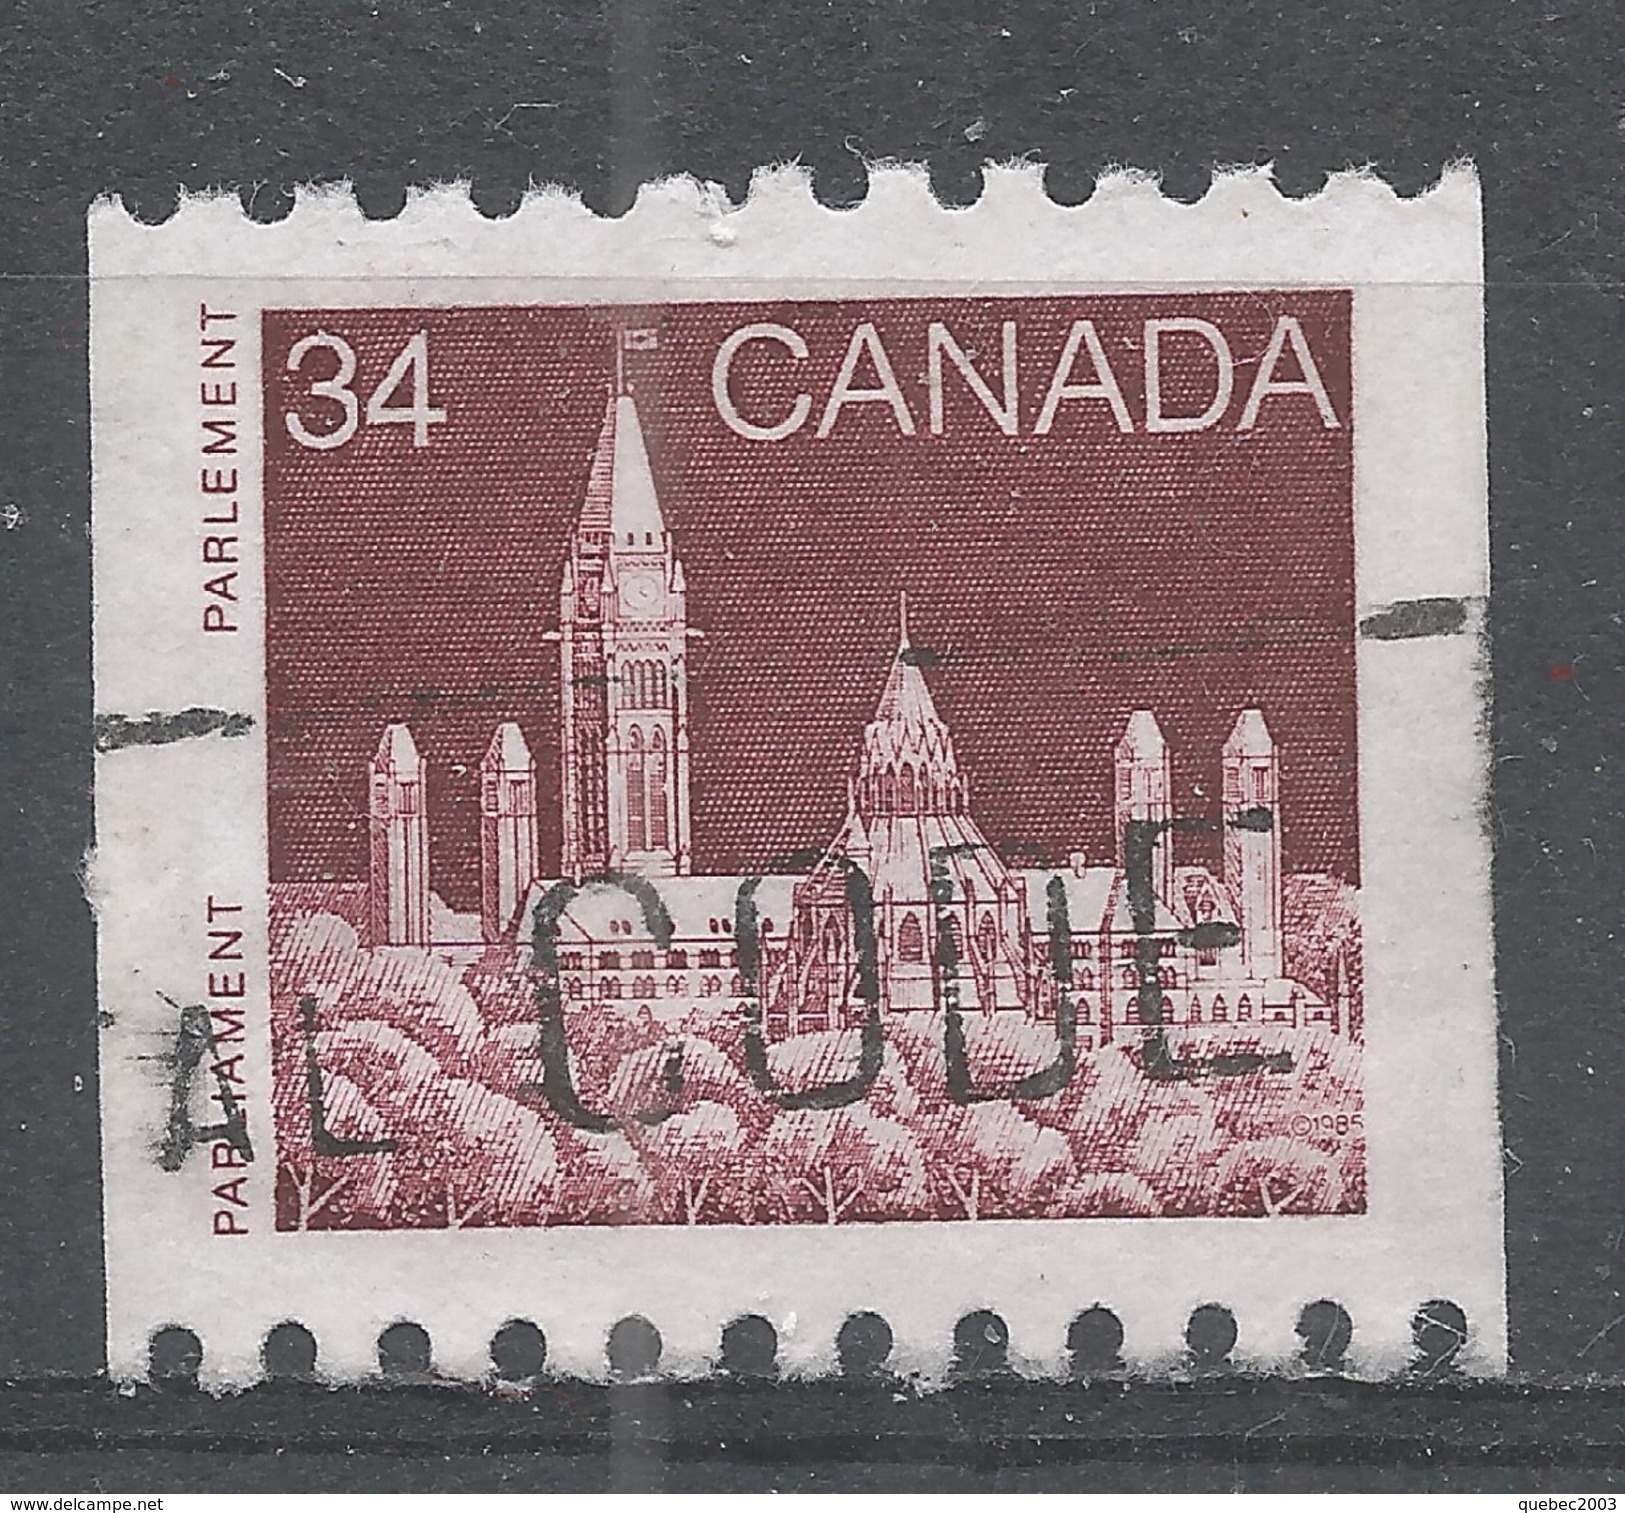 Canada 1985. Scott #952 (U) Parliament (Library)  *Complete Issue* - Coil Stamps